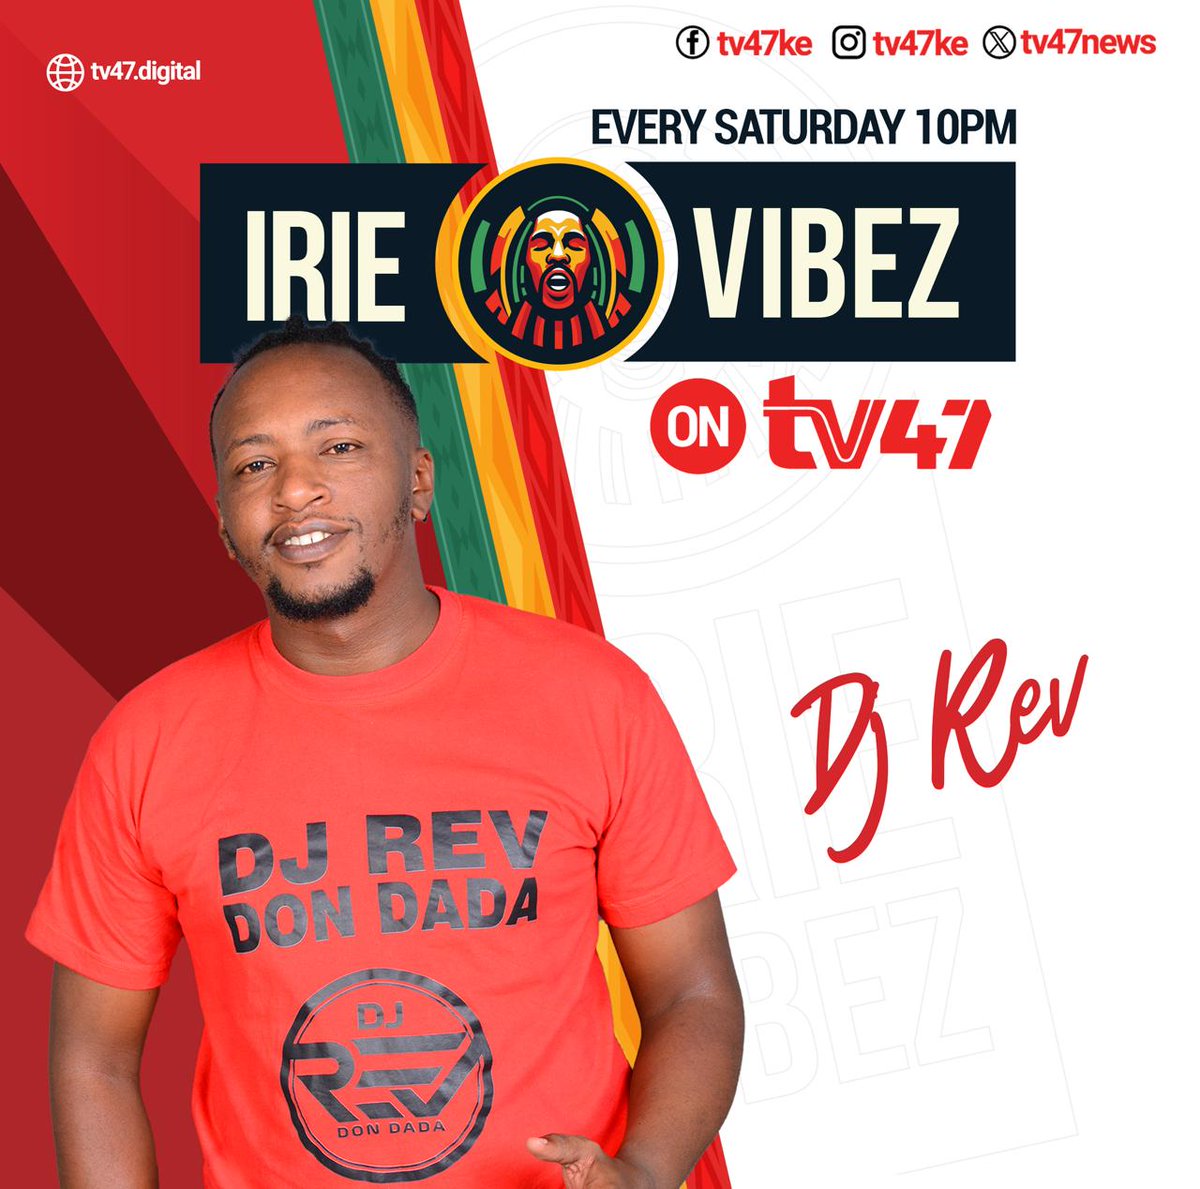 Let's get this reggae party started! 'TV47 Irie Vibes' kicks off in just a few hours, so make sure you're tuned in for the ultimate Saturday night soundtrack. With Shatta Buay as your host, you know it's going to be epic. #IrieVibezTV47